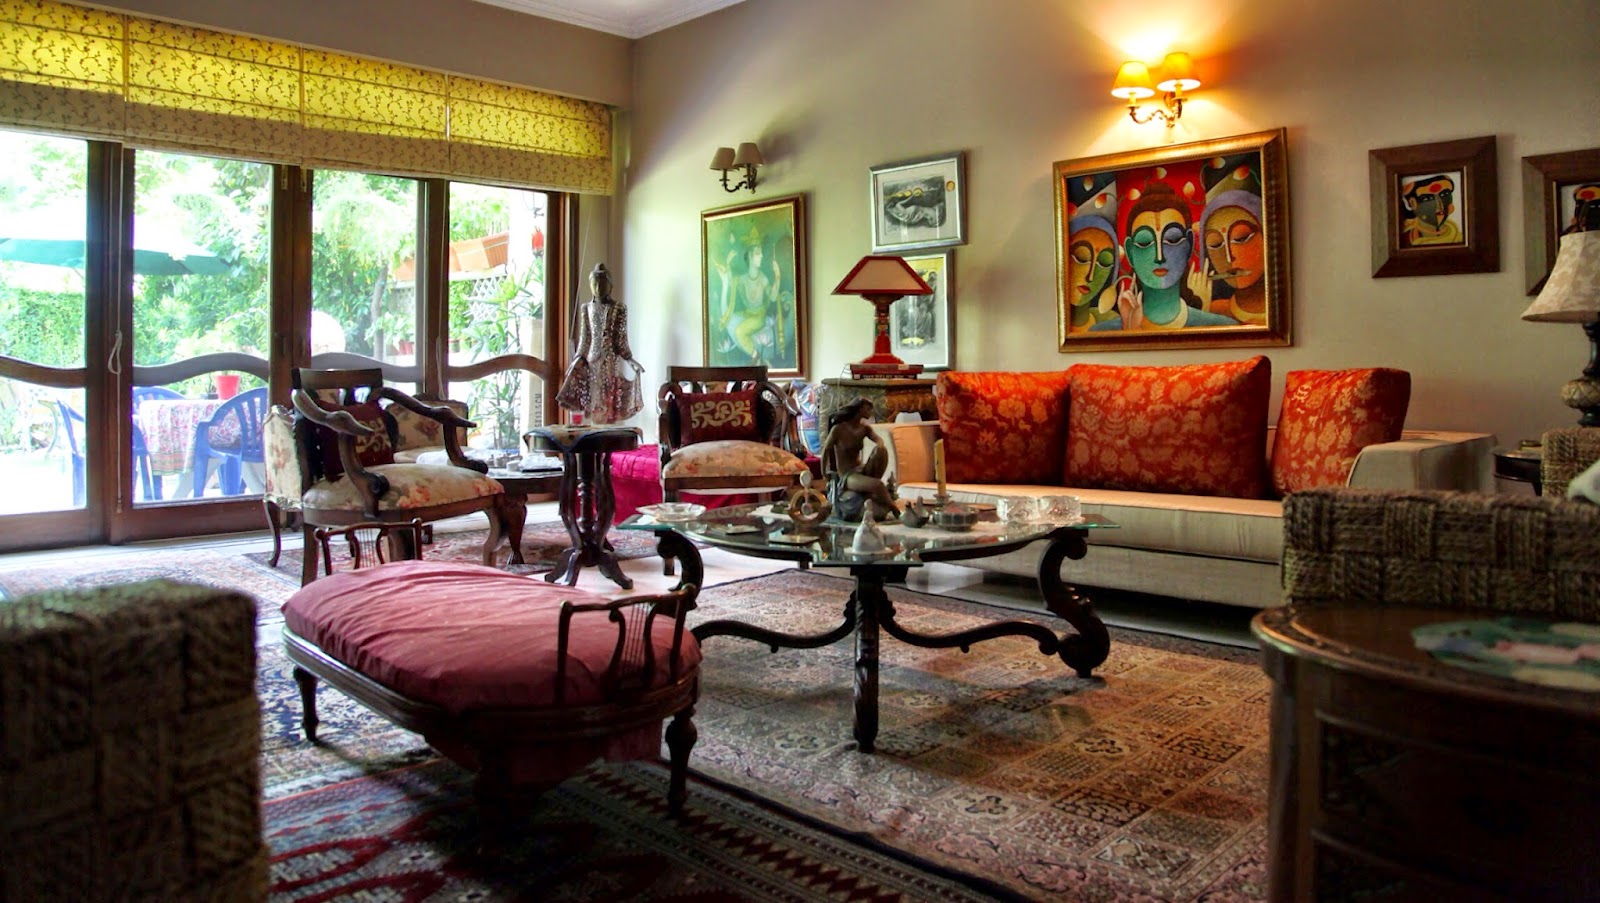 Aradhana Anand's Bold and Eclectic New Delhi Home - The Keybunch Decor Blog